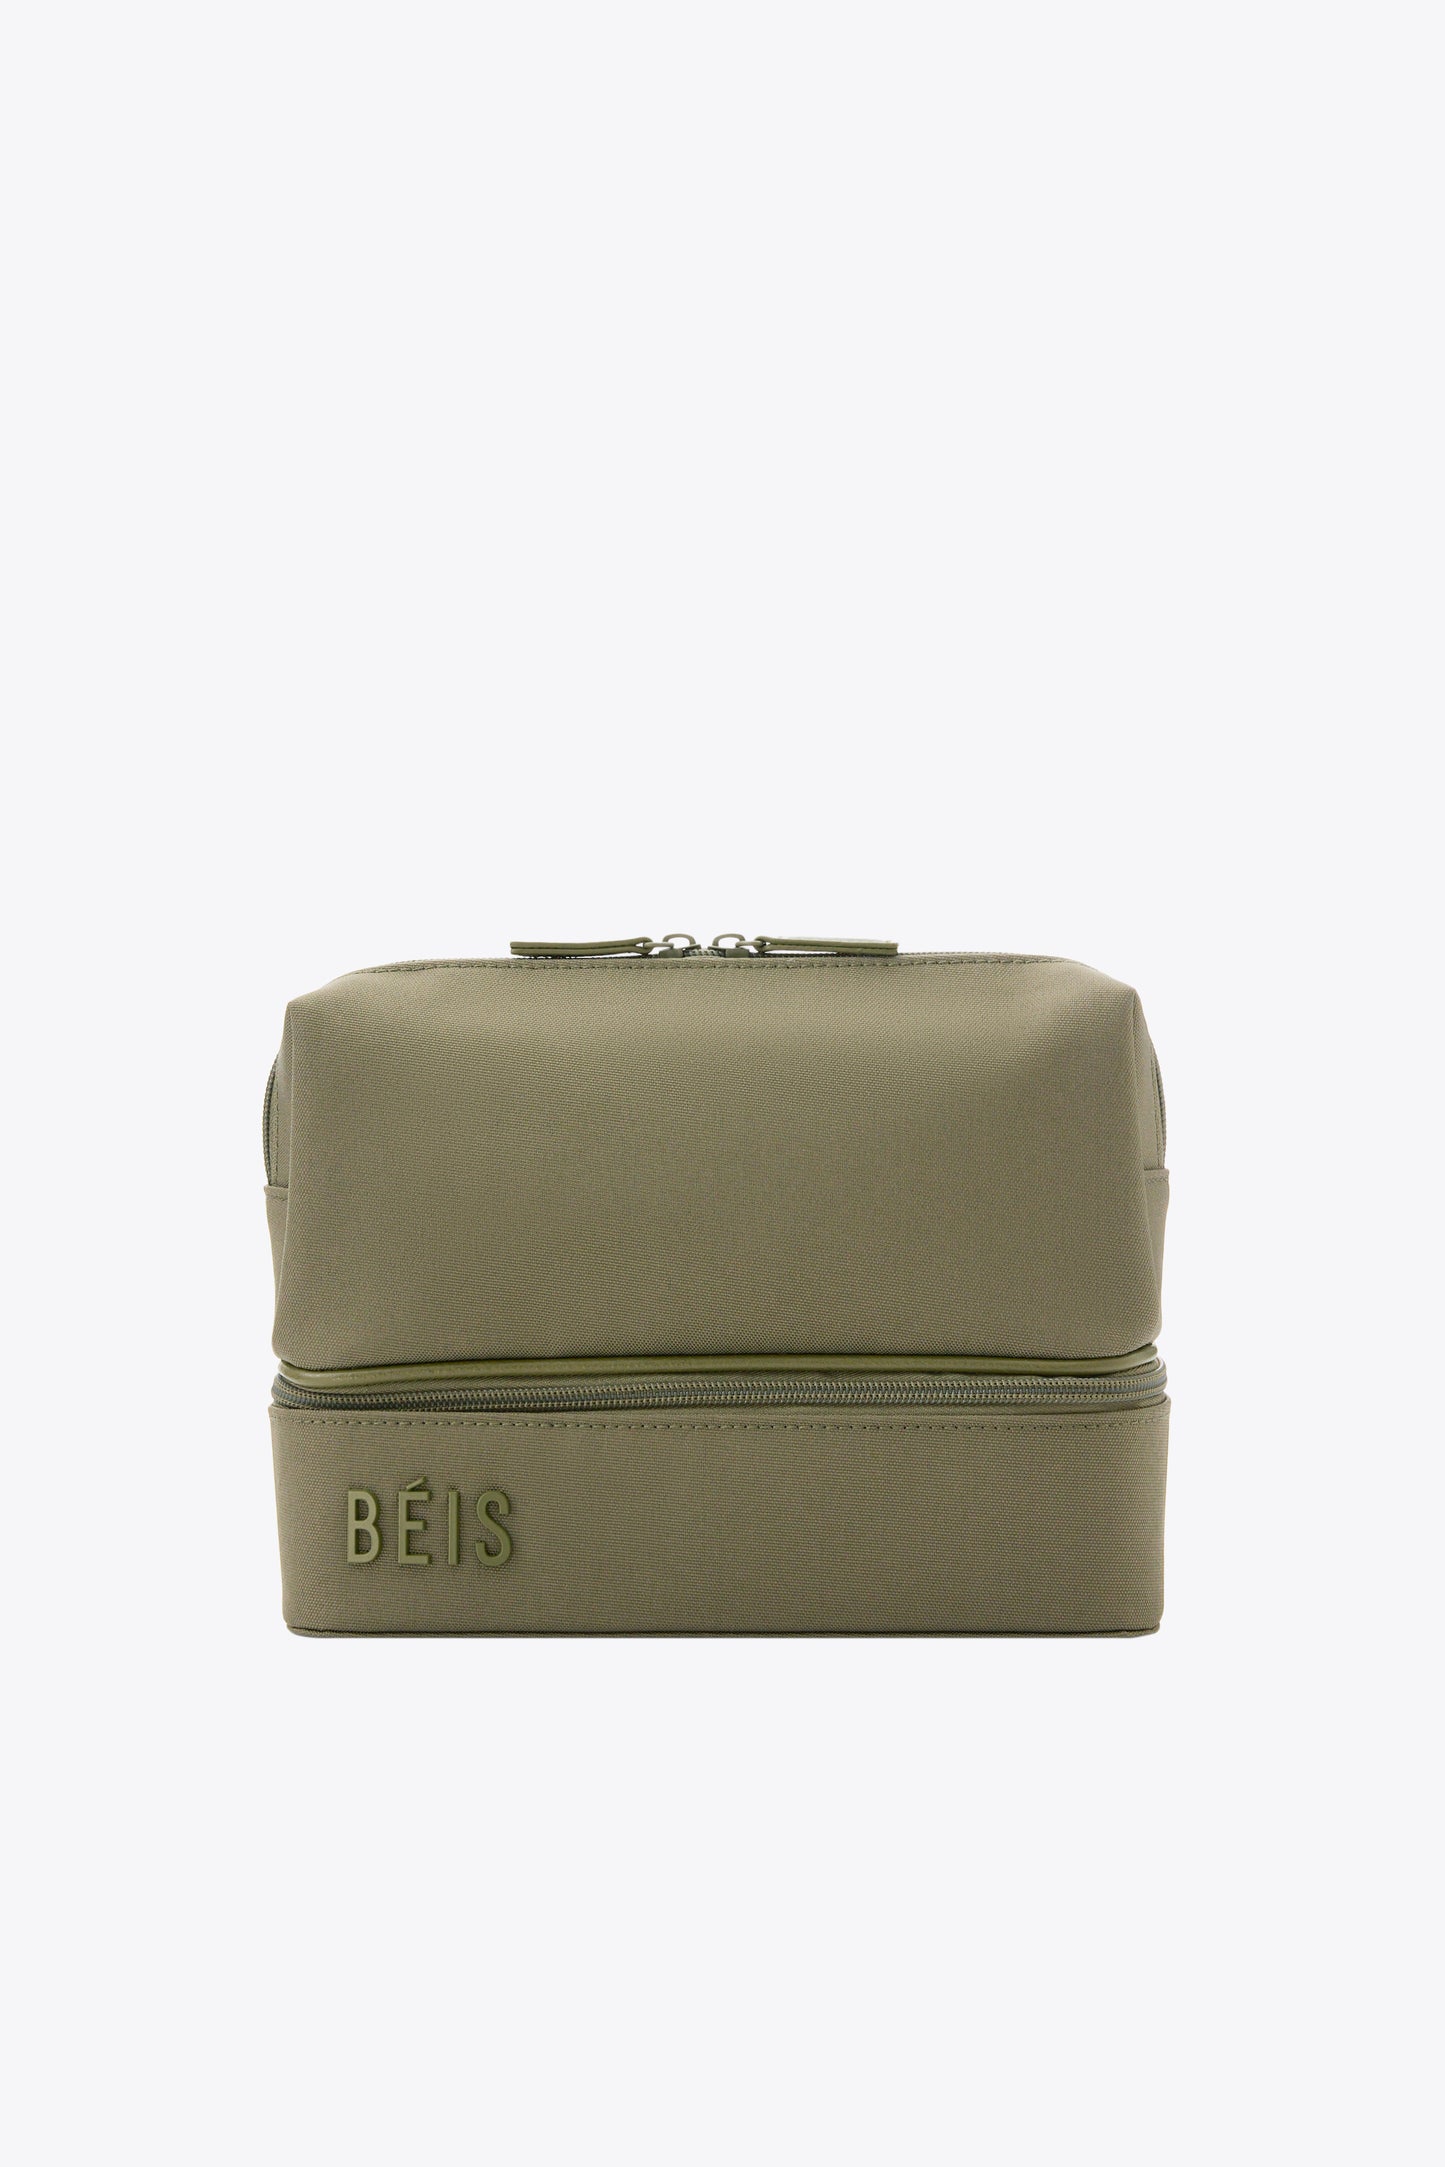 The Cosmetic Organizer in Olive